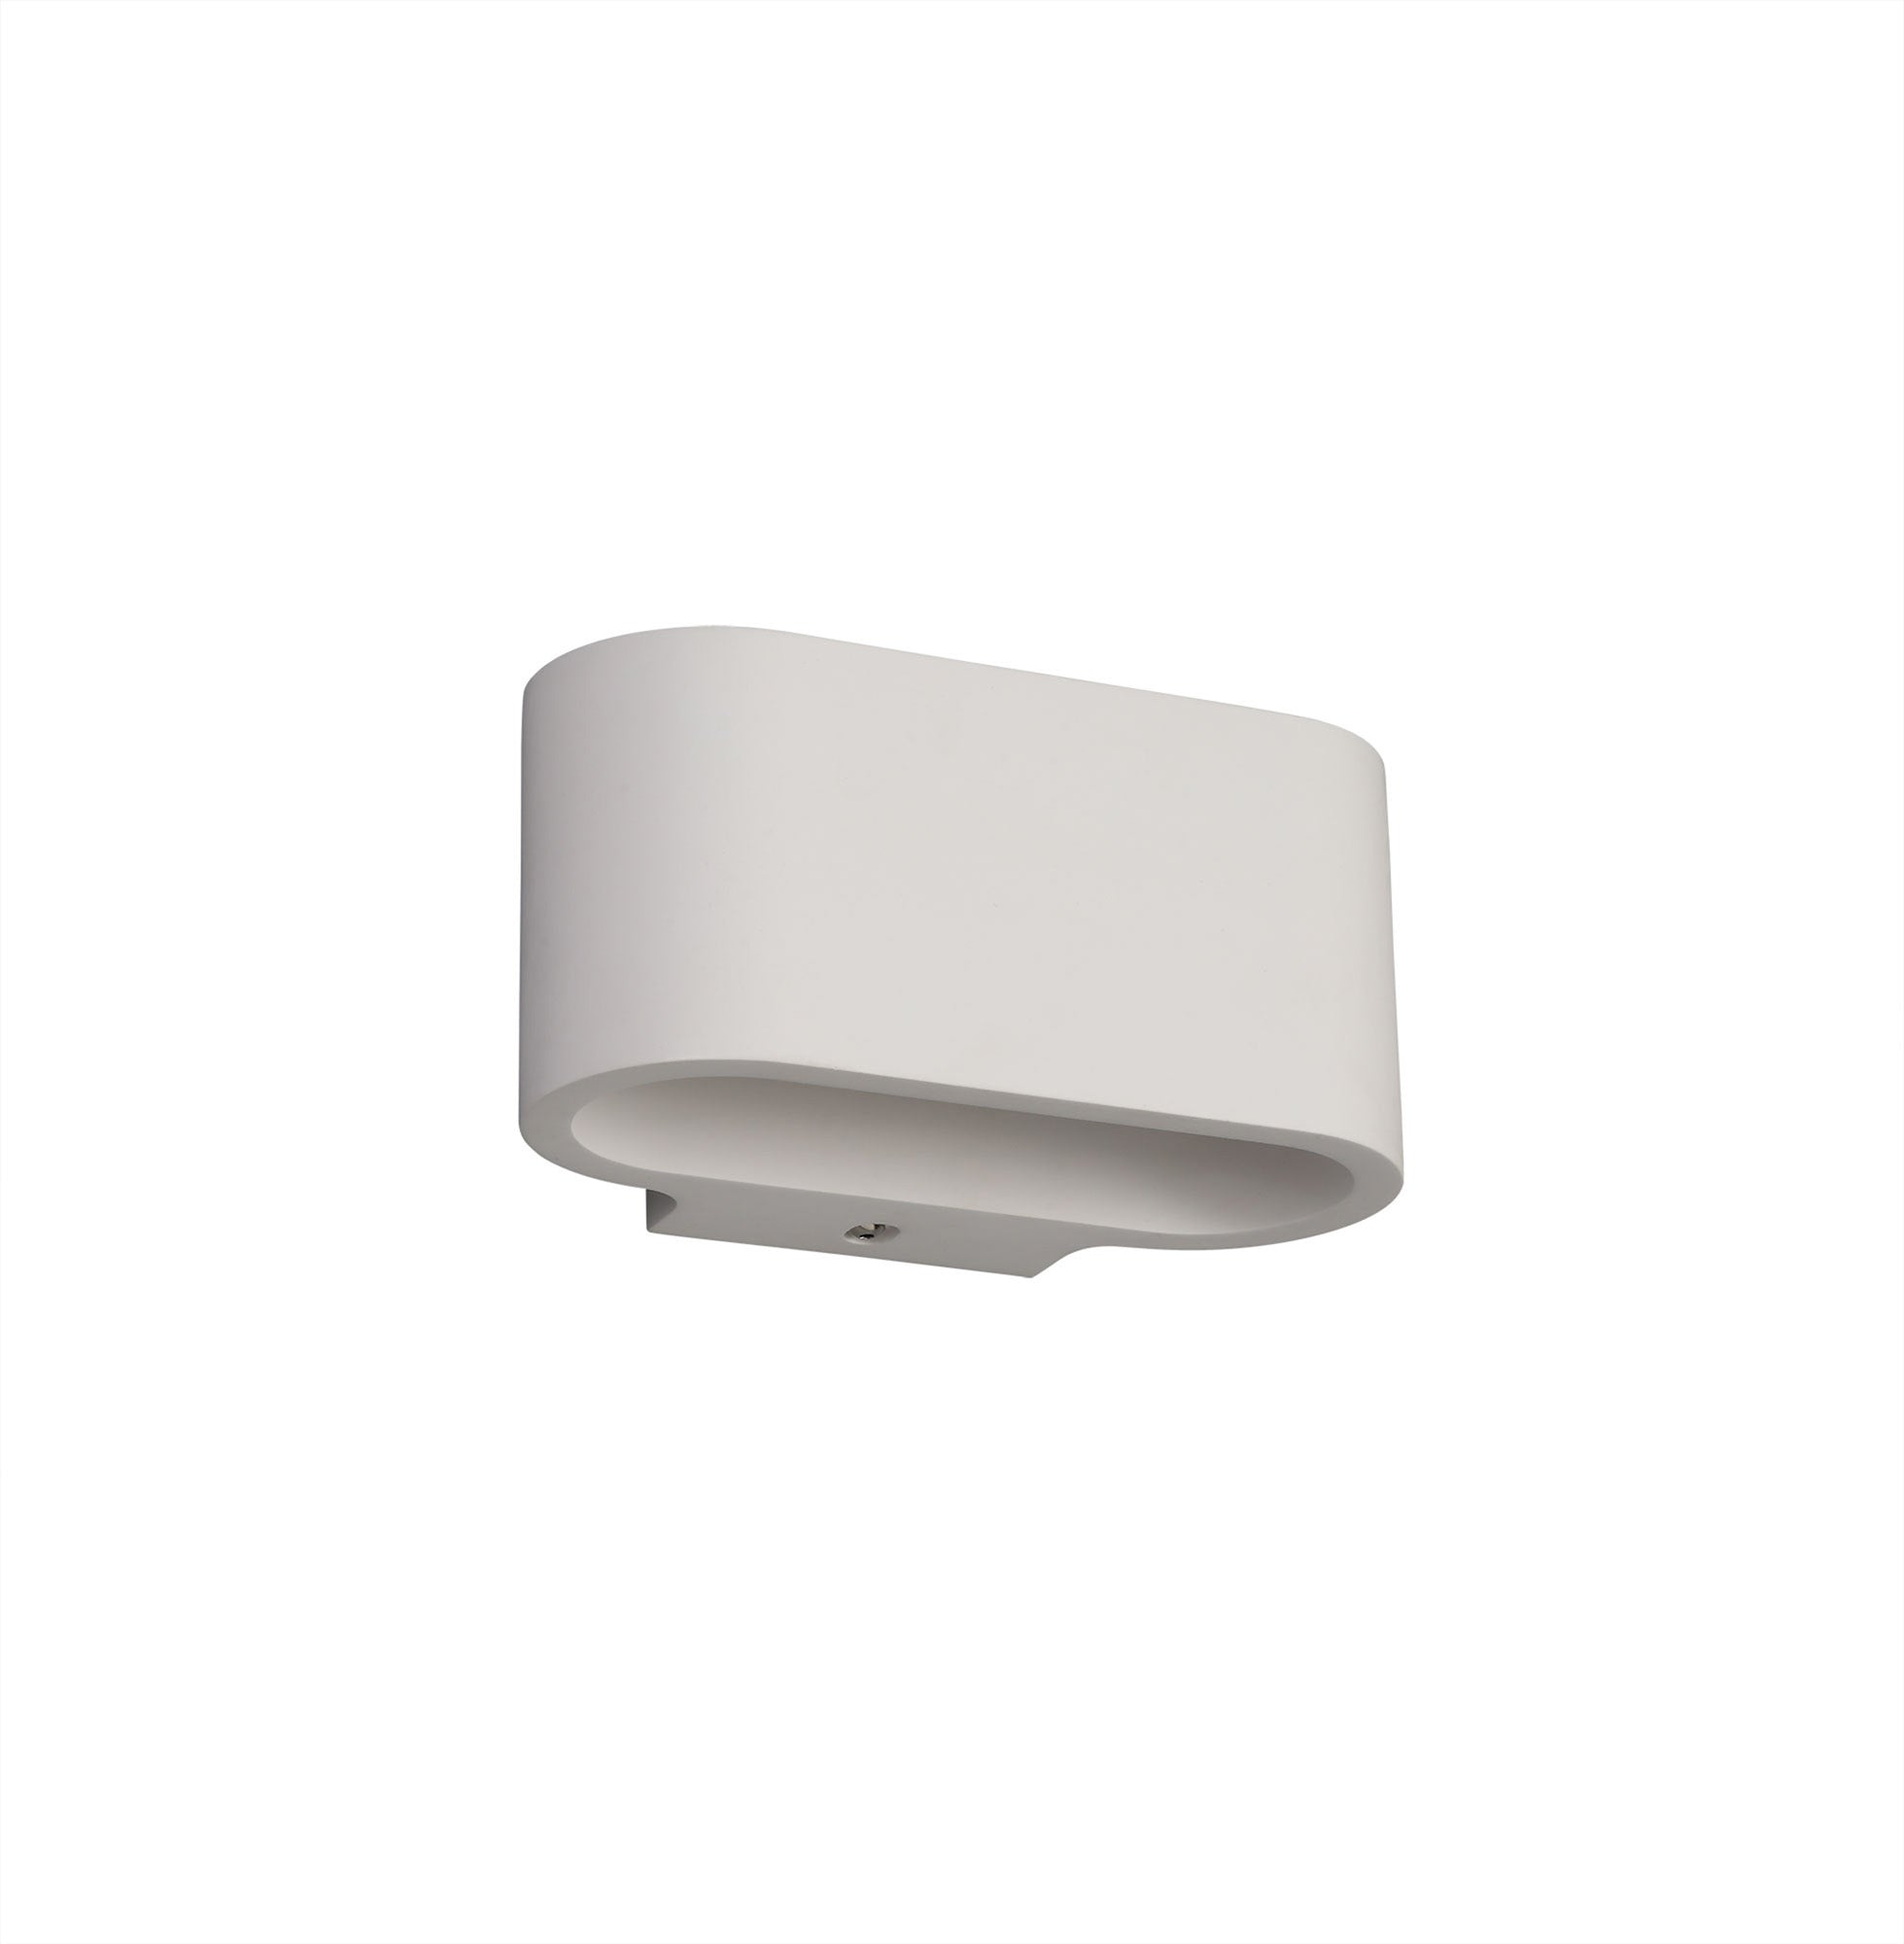 Alina Oval Wall Lamp, 1 x G9, White Paintable Gypsum